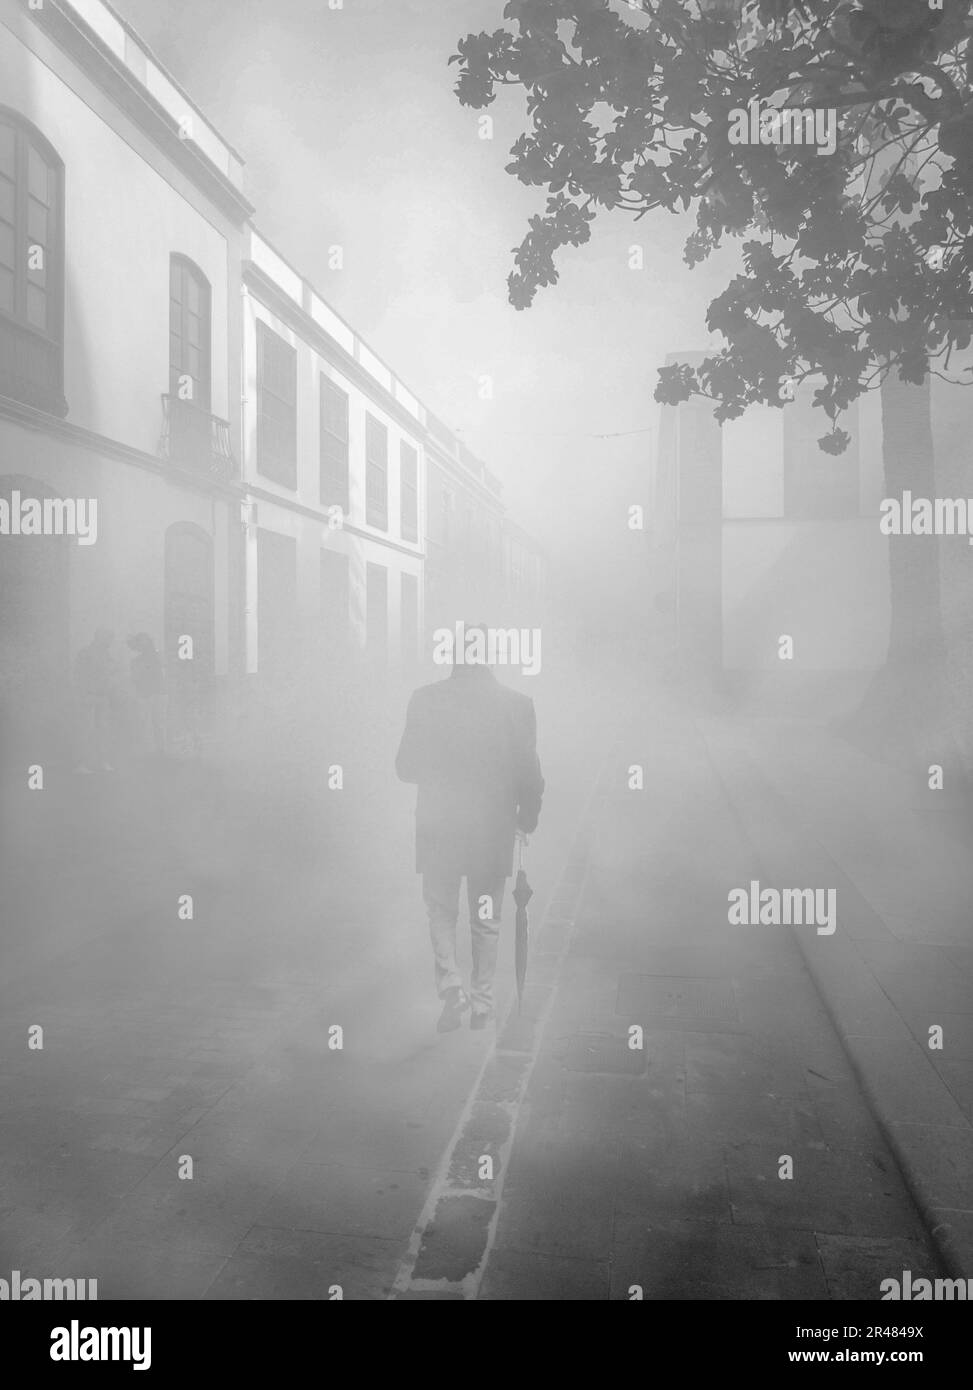 A vertical shot of a silhouette of an older male with an umbrella walking in the mist Stock Photo